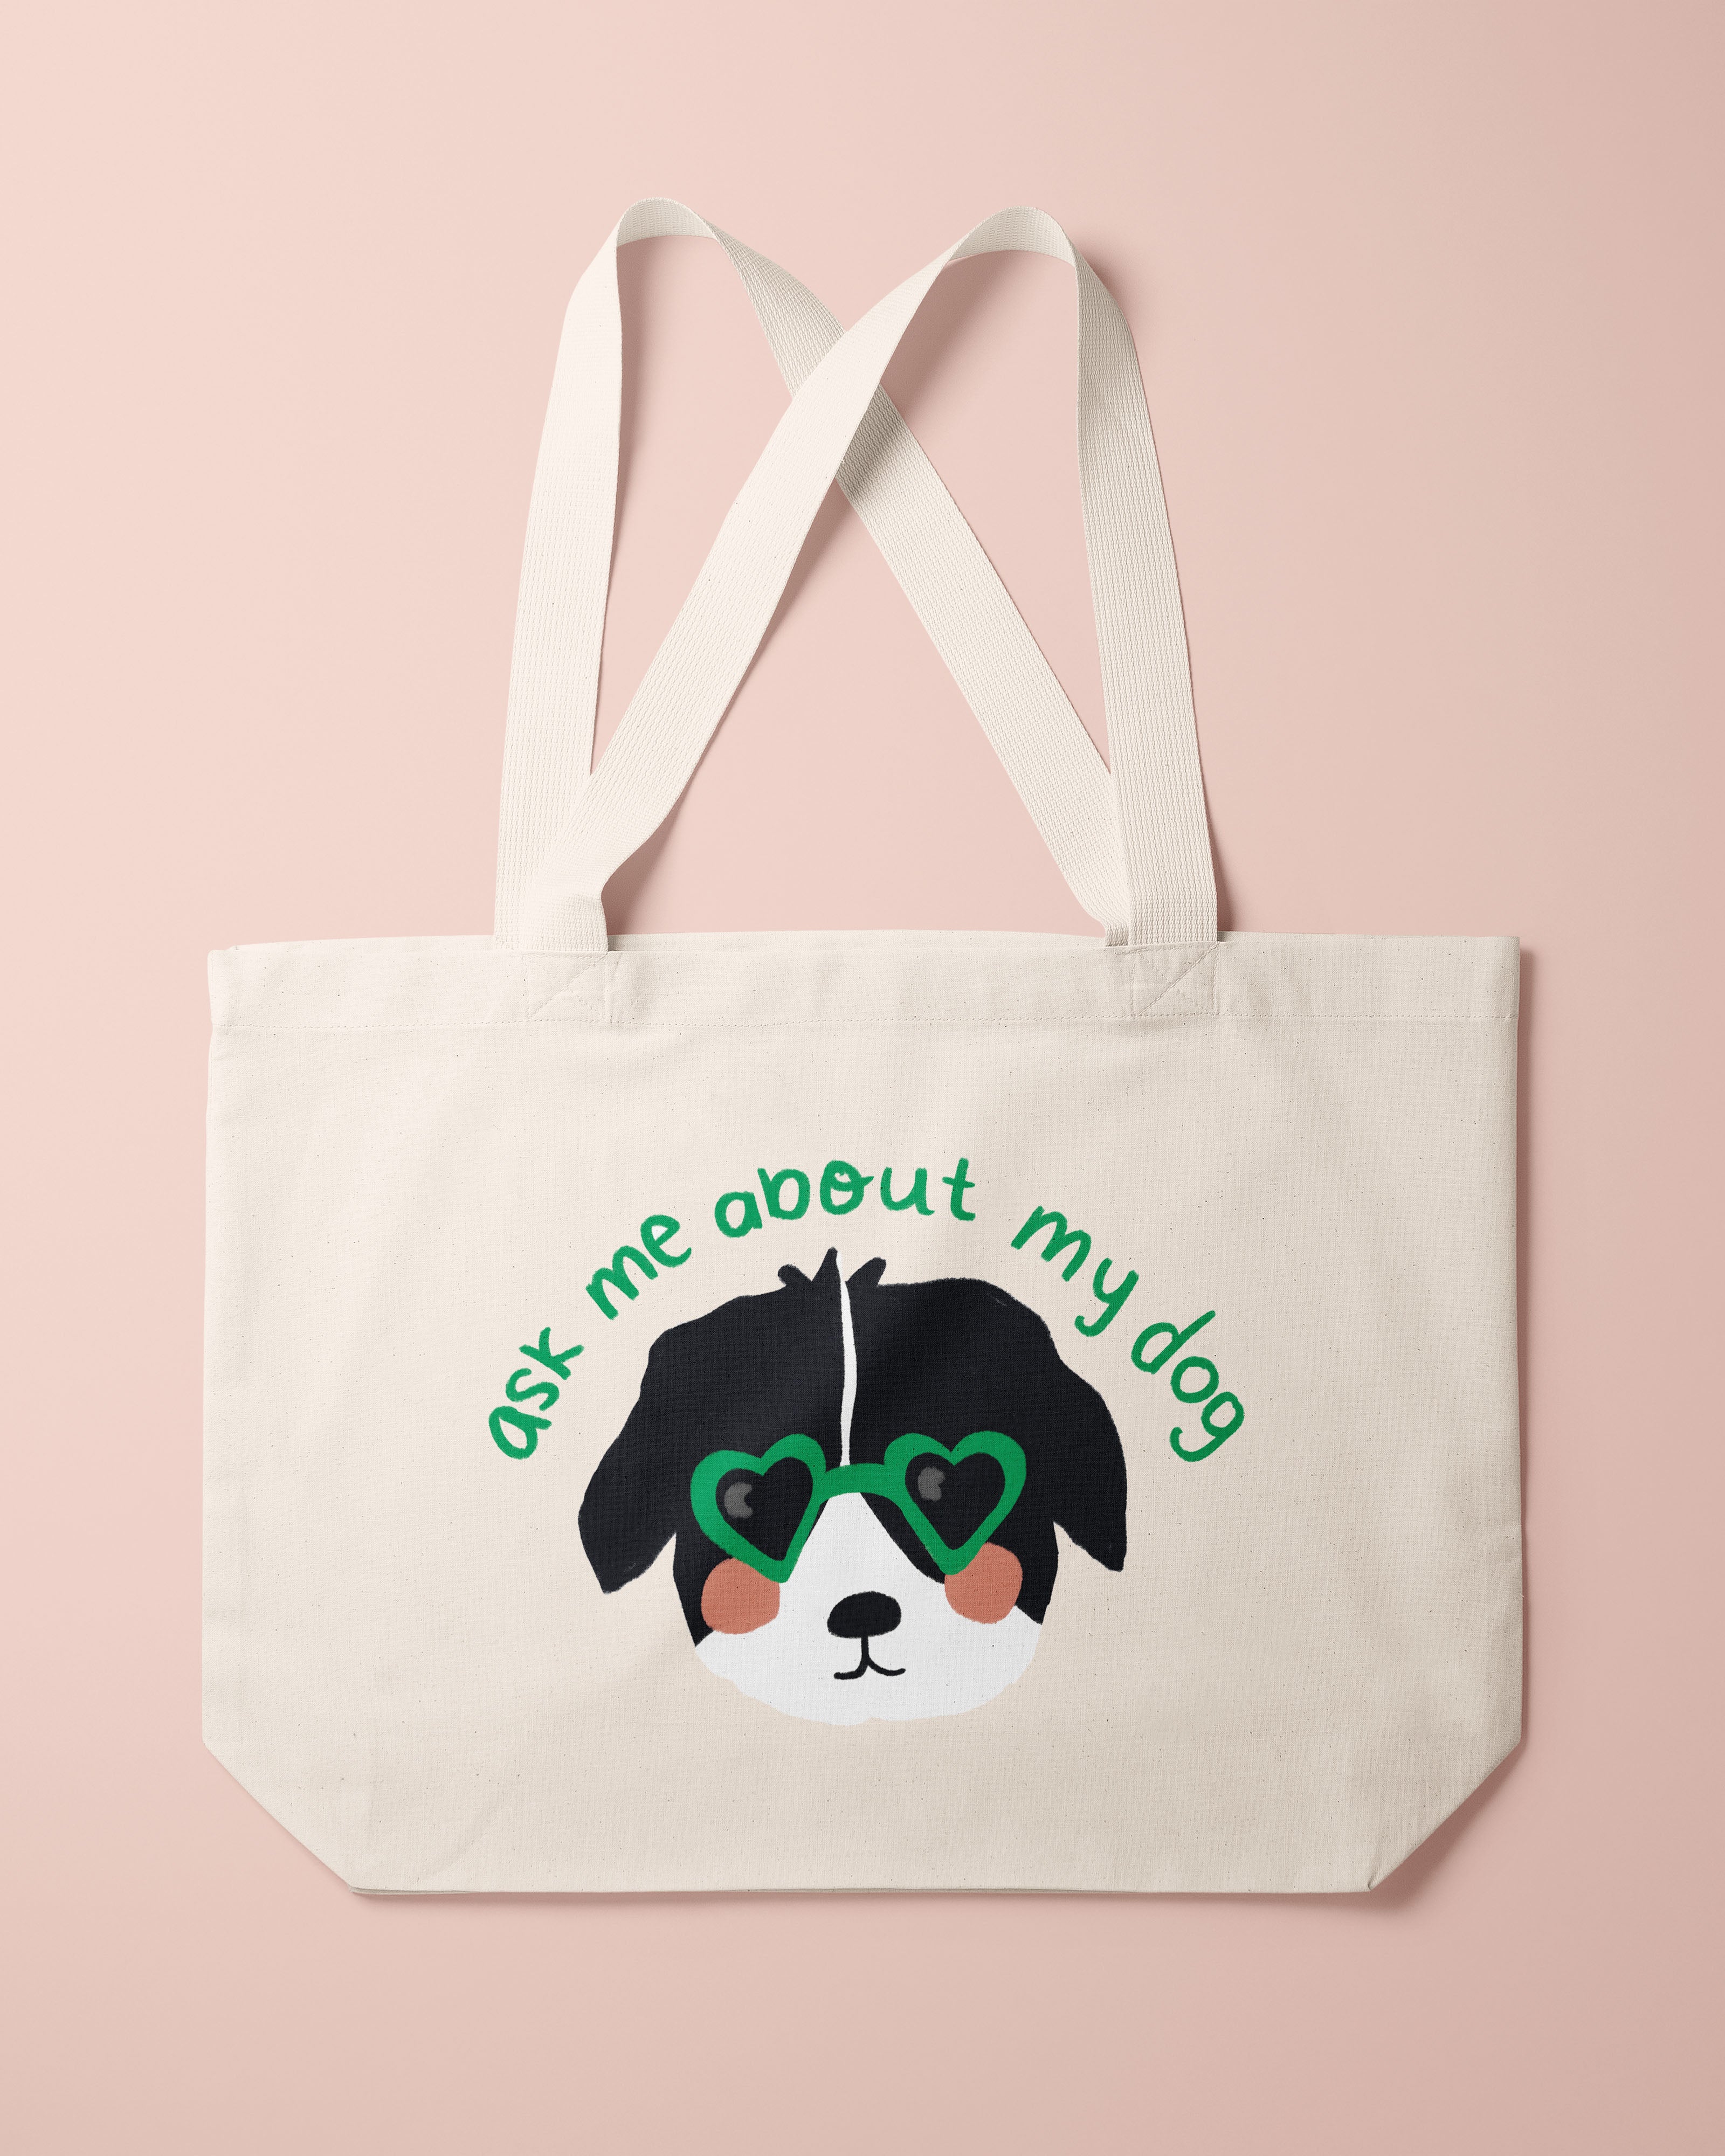 Ask Me About My Dog Tote